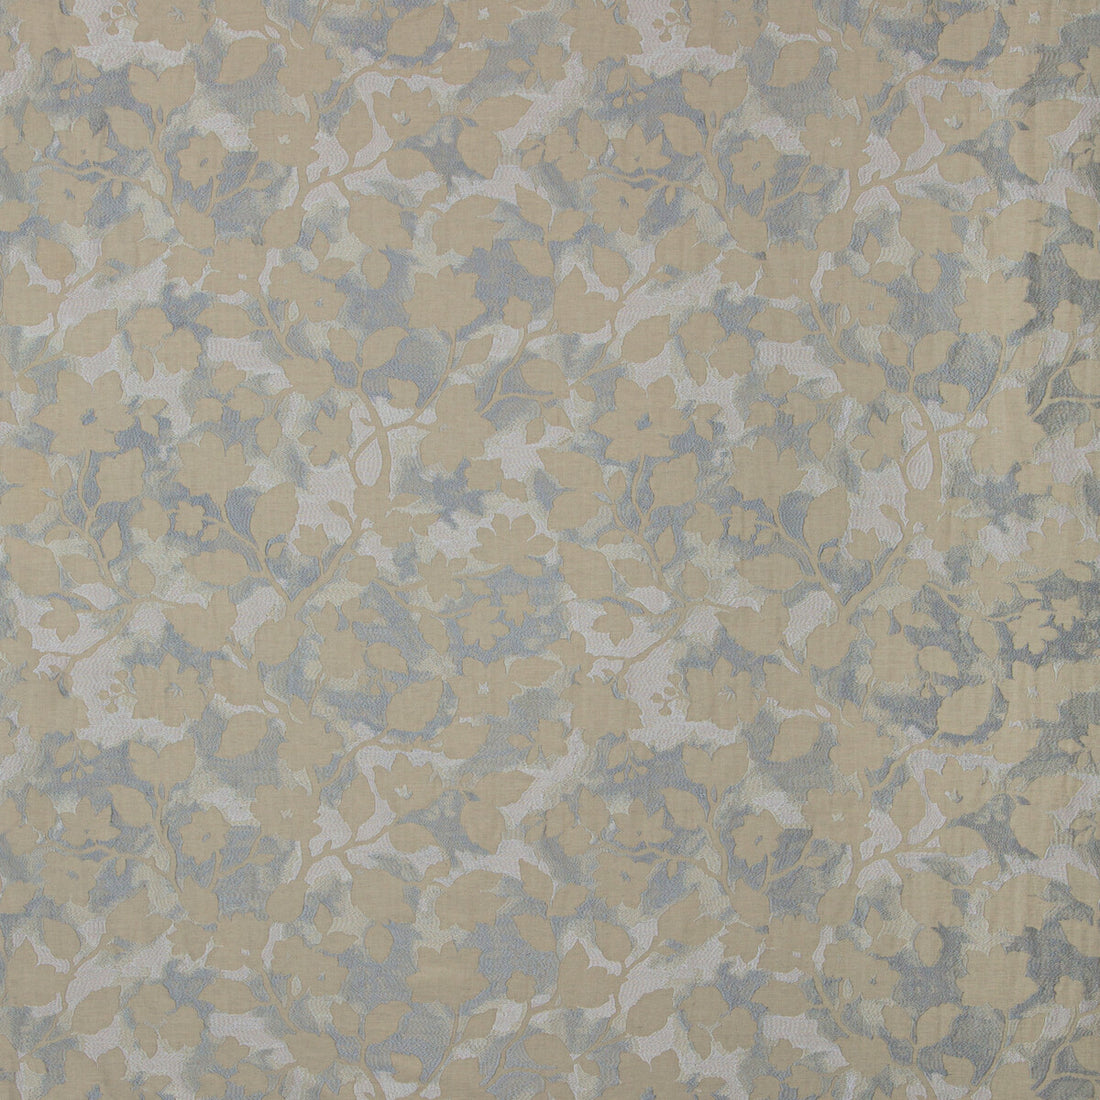 Les Fleurs fabric in glacier color - pattern 35554.15.0 - by Kravet Couture in the Modern Colors-Sojourn Collection collection